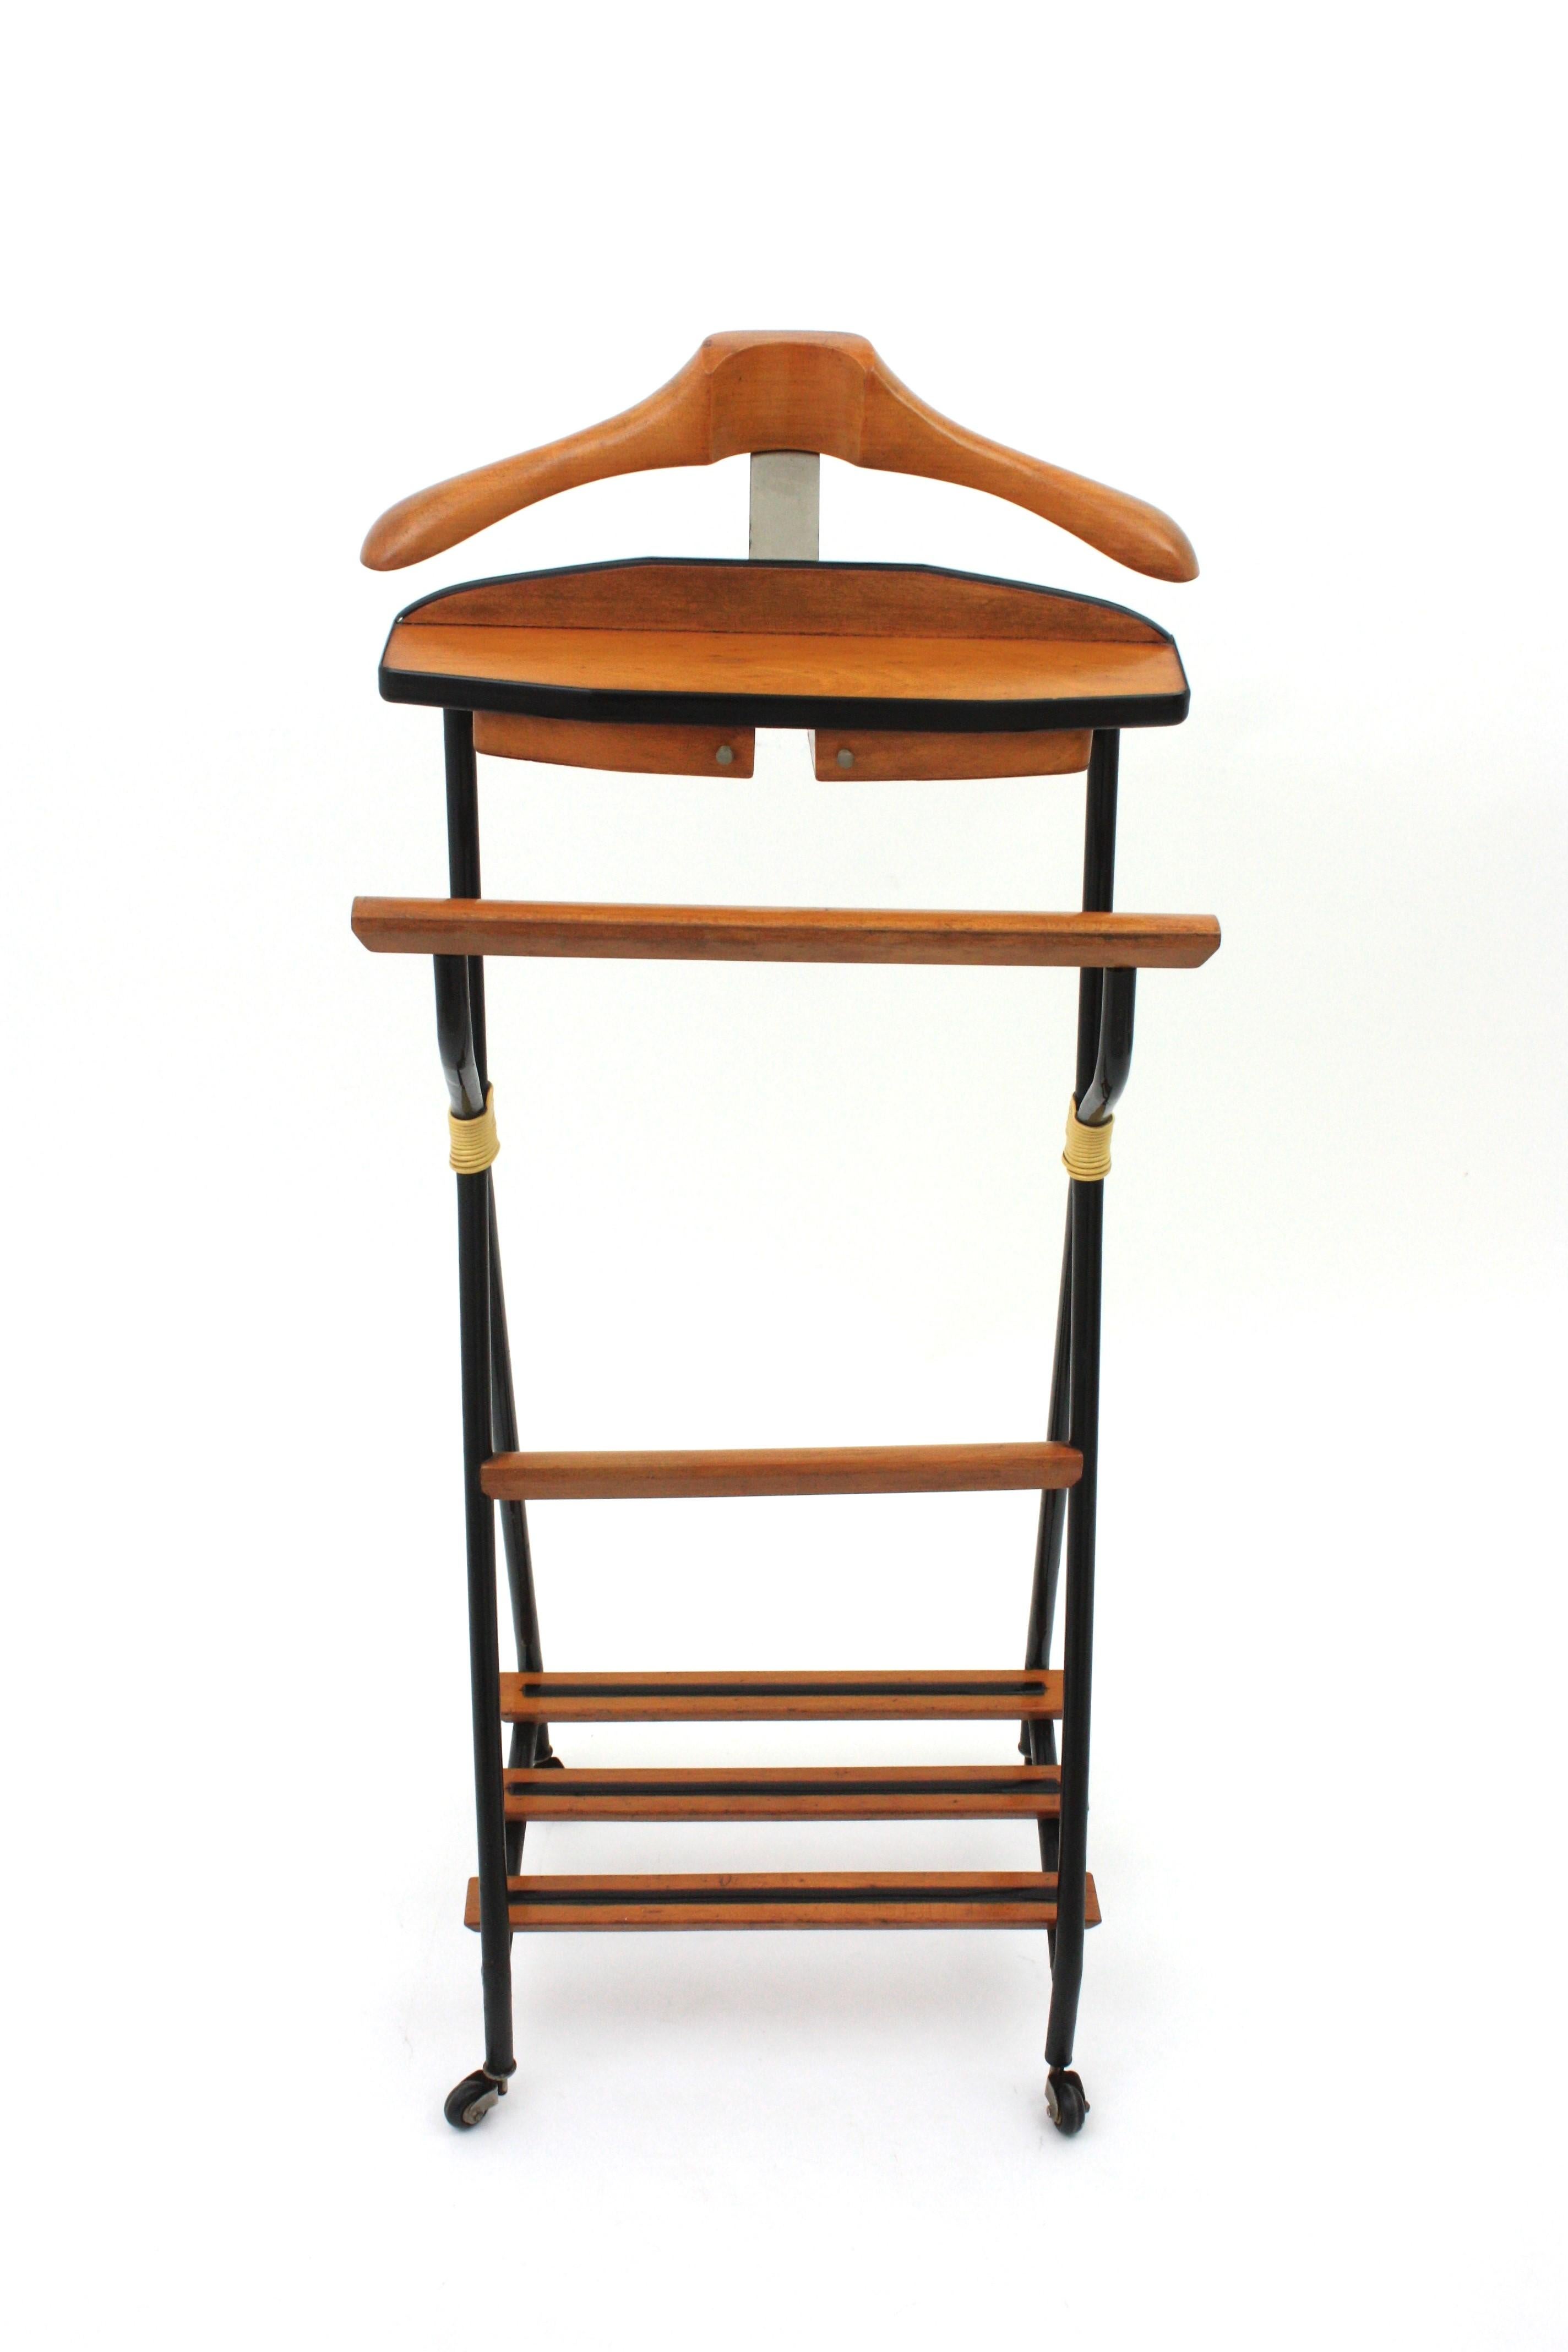 Italian 1950s Clothes Valet Stand with two drawers, Wood and Black Lacquered Metal
Italian Rolling Valet or Coat Stand in Wood and Metal
This outstanding dressboy valet stand features a beech wood structure with acrylic details. It has a nice design